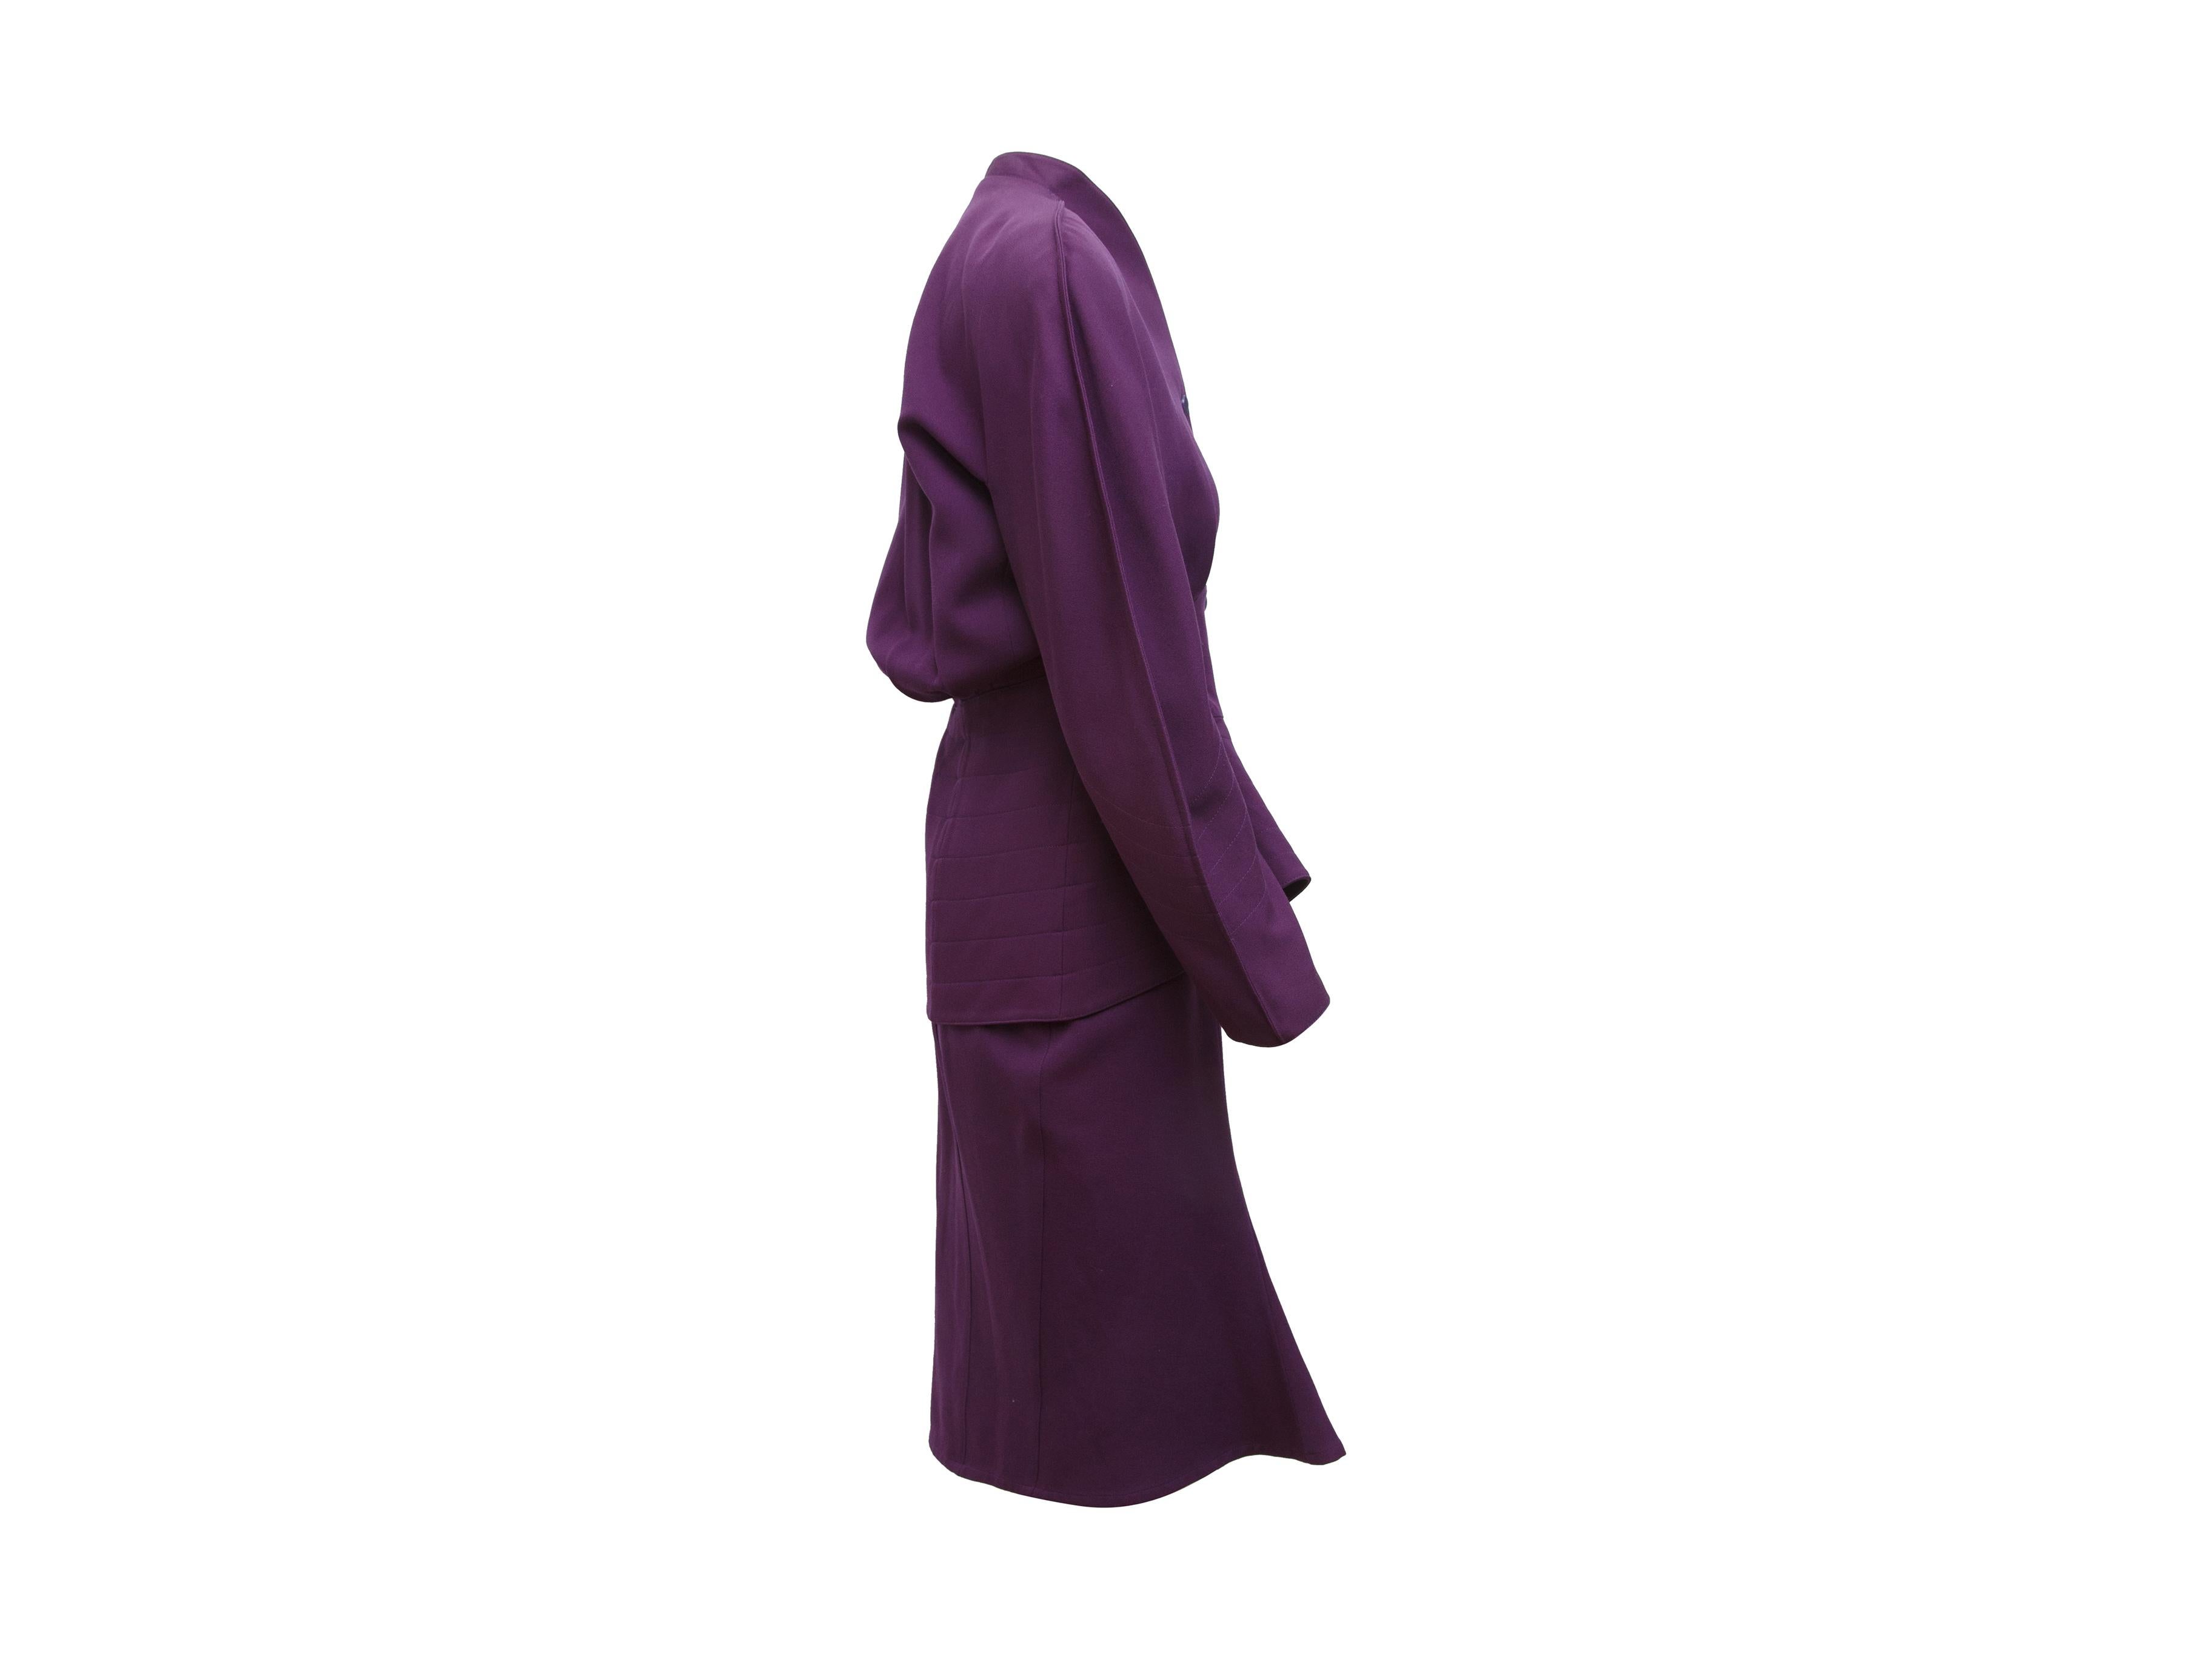 Product details:  Vintage purple wool skirt suit set by Thierry Mugler.  Circa the 1980s.  Stand collar.  Long sleeves.  Button-front closure.  Banded waist.  Matching pencil skirt.  Concealed hook and zip fly closure.  Label size FR 42.  Jacket: 